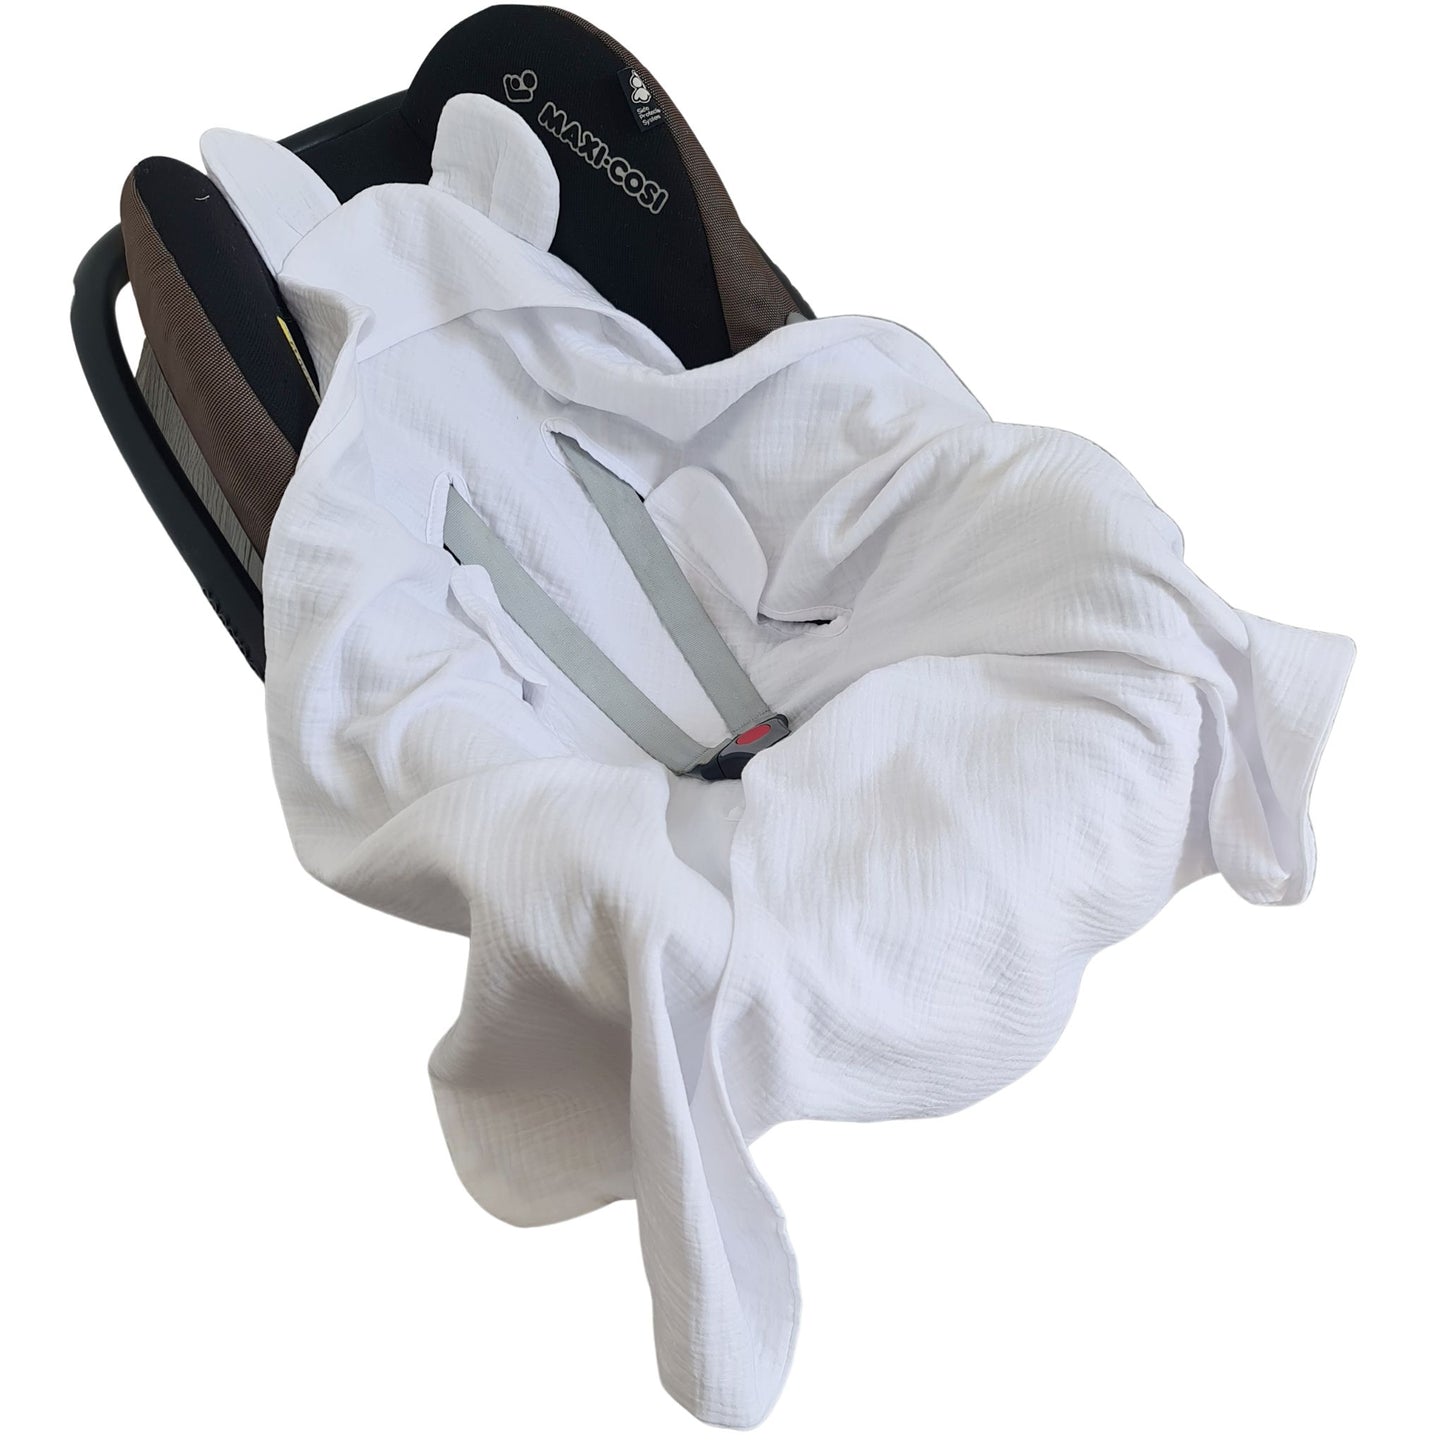 white blanket for baby 100% cotton breathable